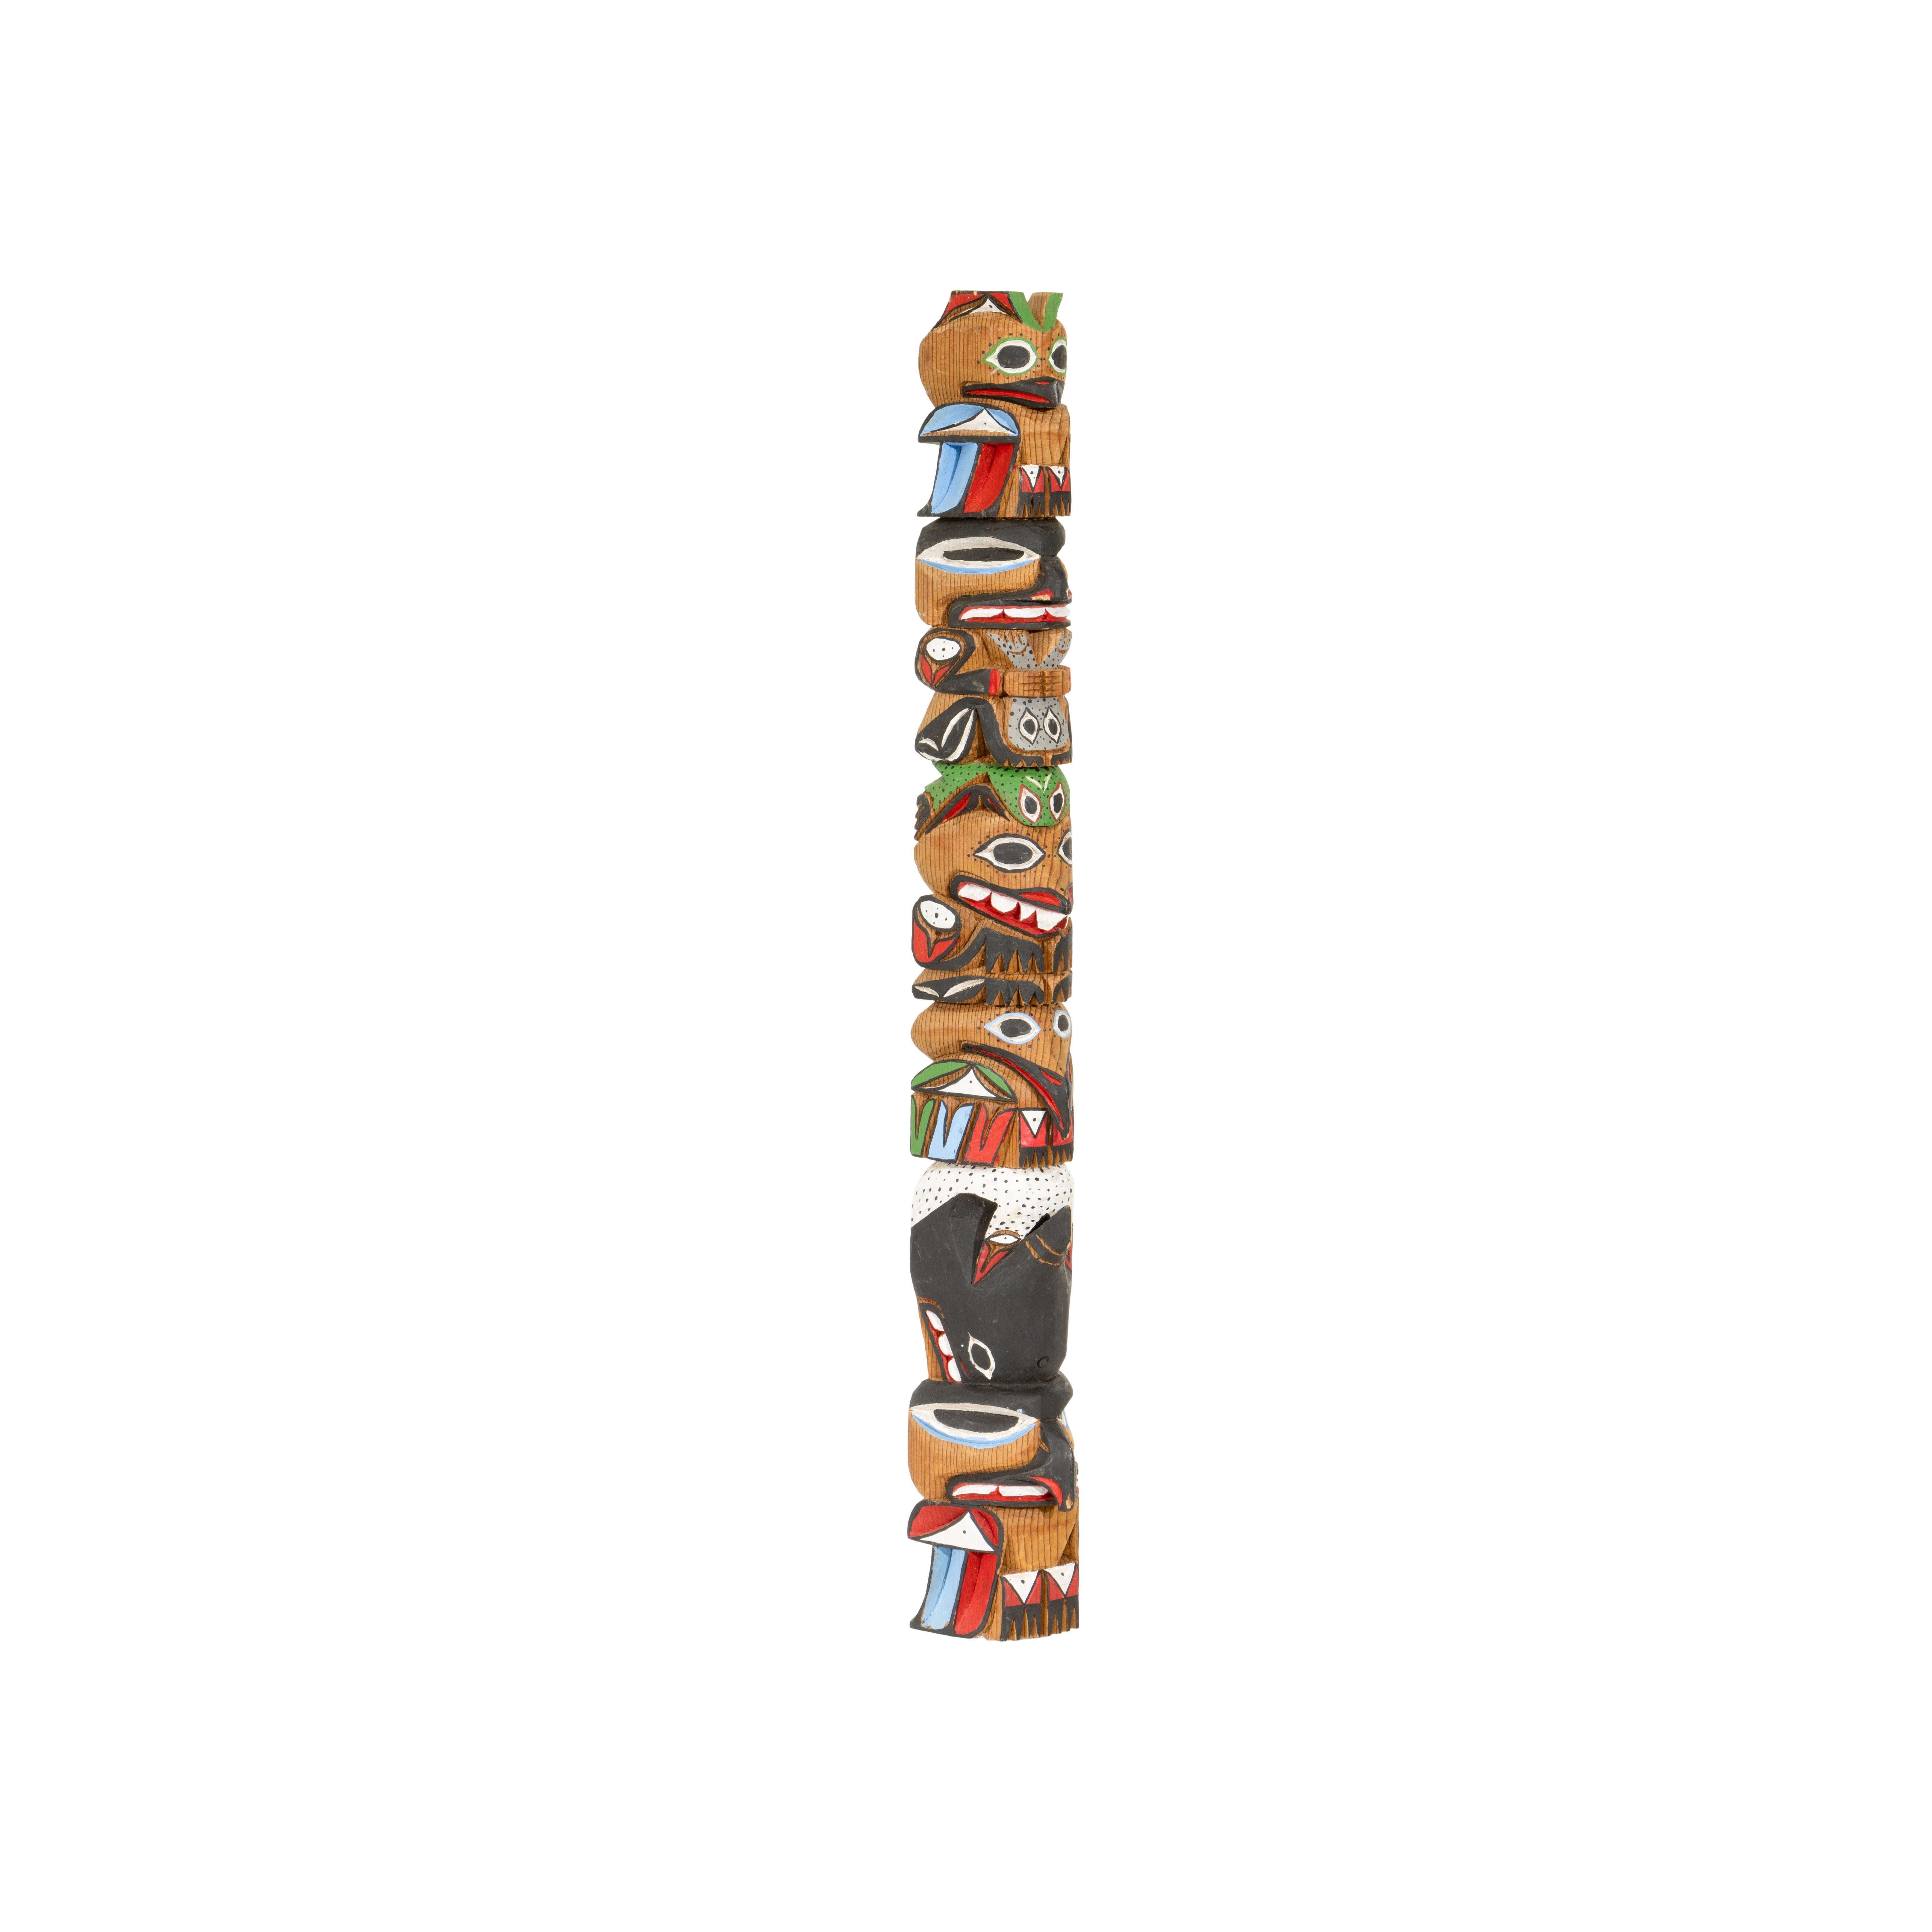 Canadian Native Nootka Totem by Rick Williams, 2 Foot For Sale